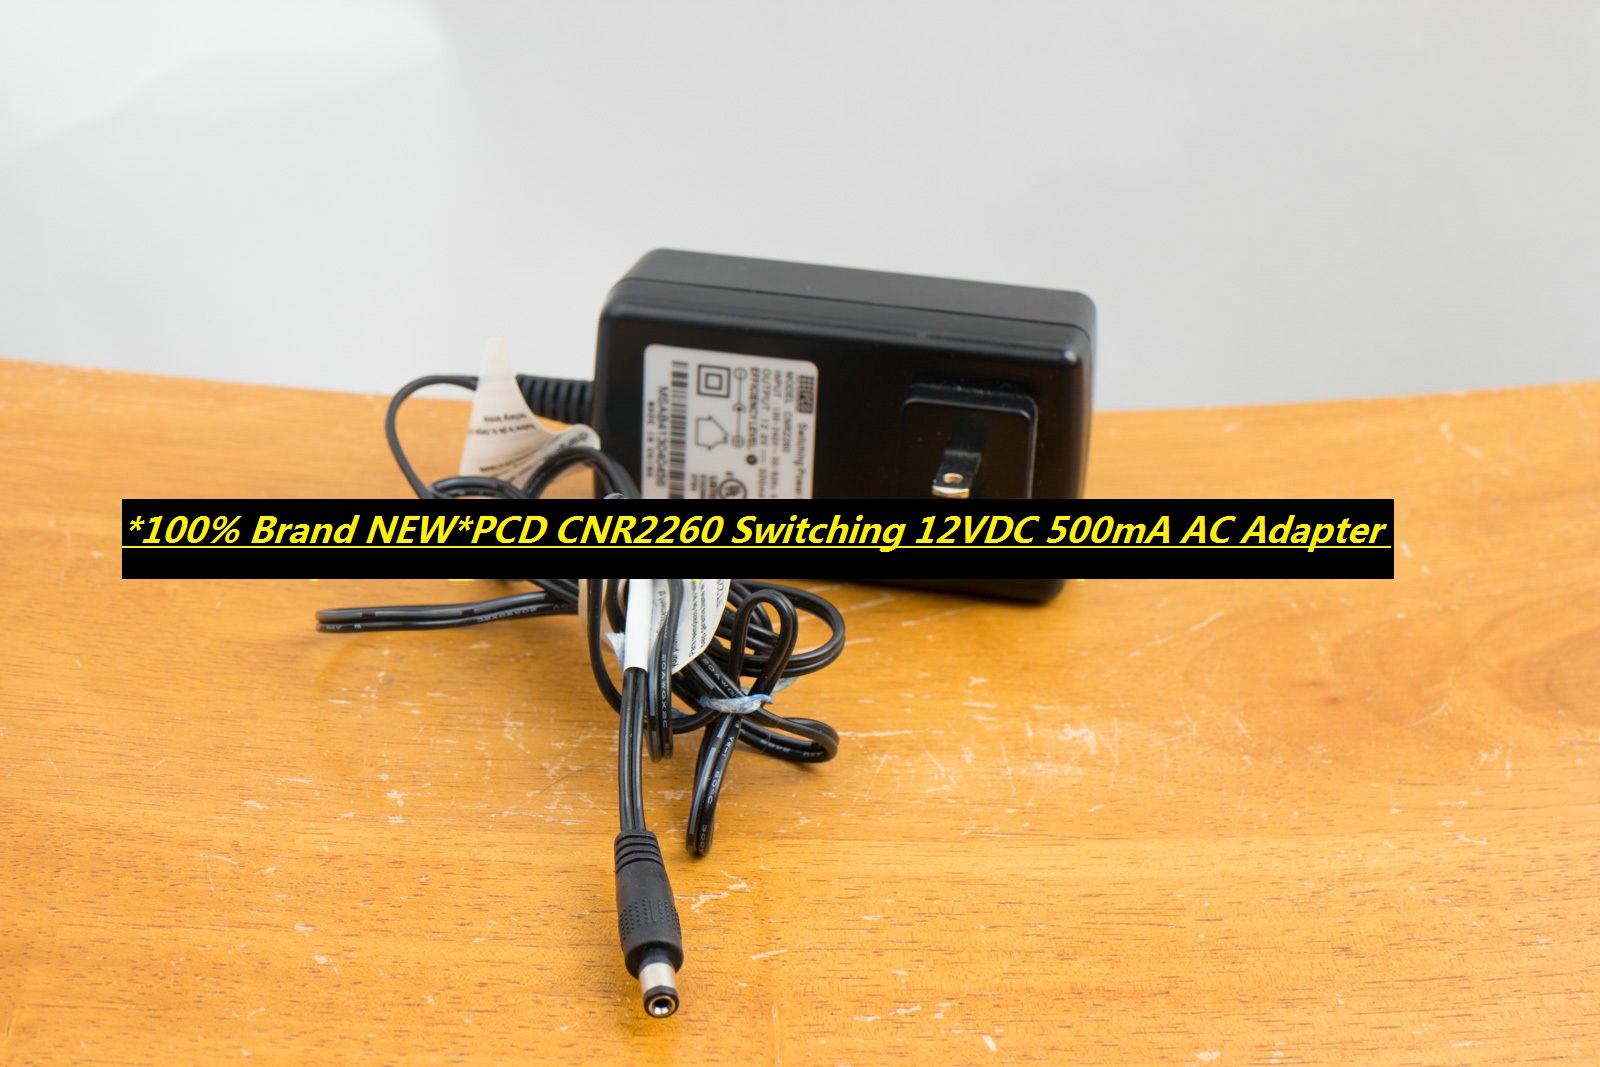 *100% Brand NEW*PCD CNR2260 Switching 12VDC 500mA AC Adapter Power Supply